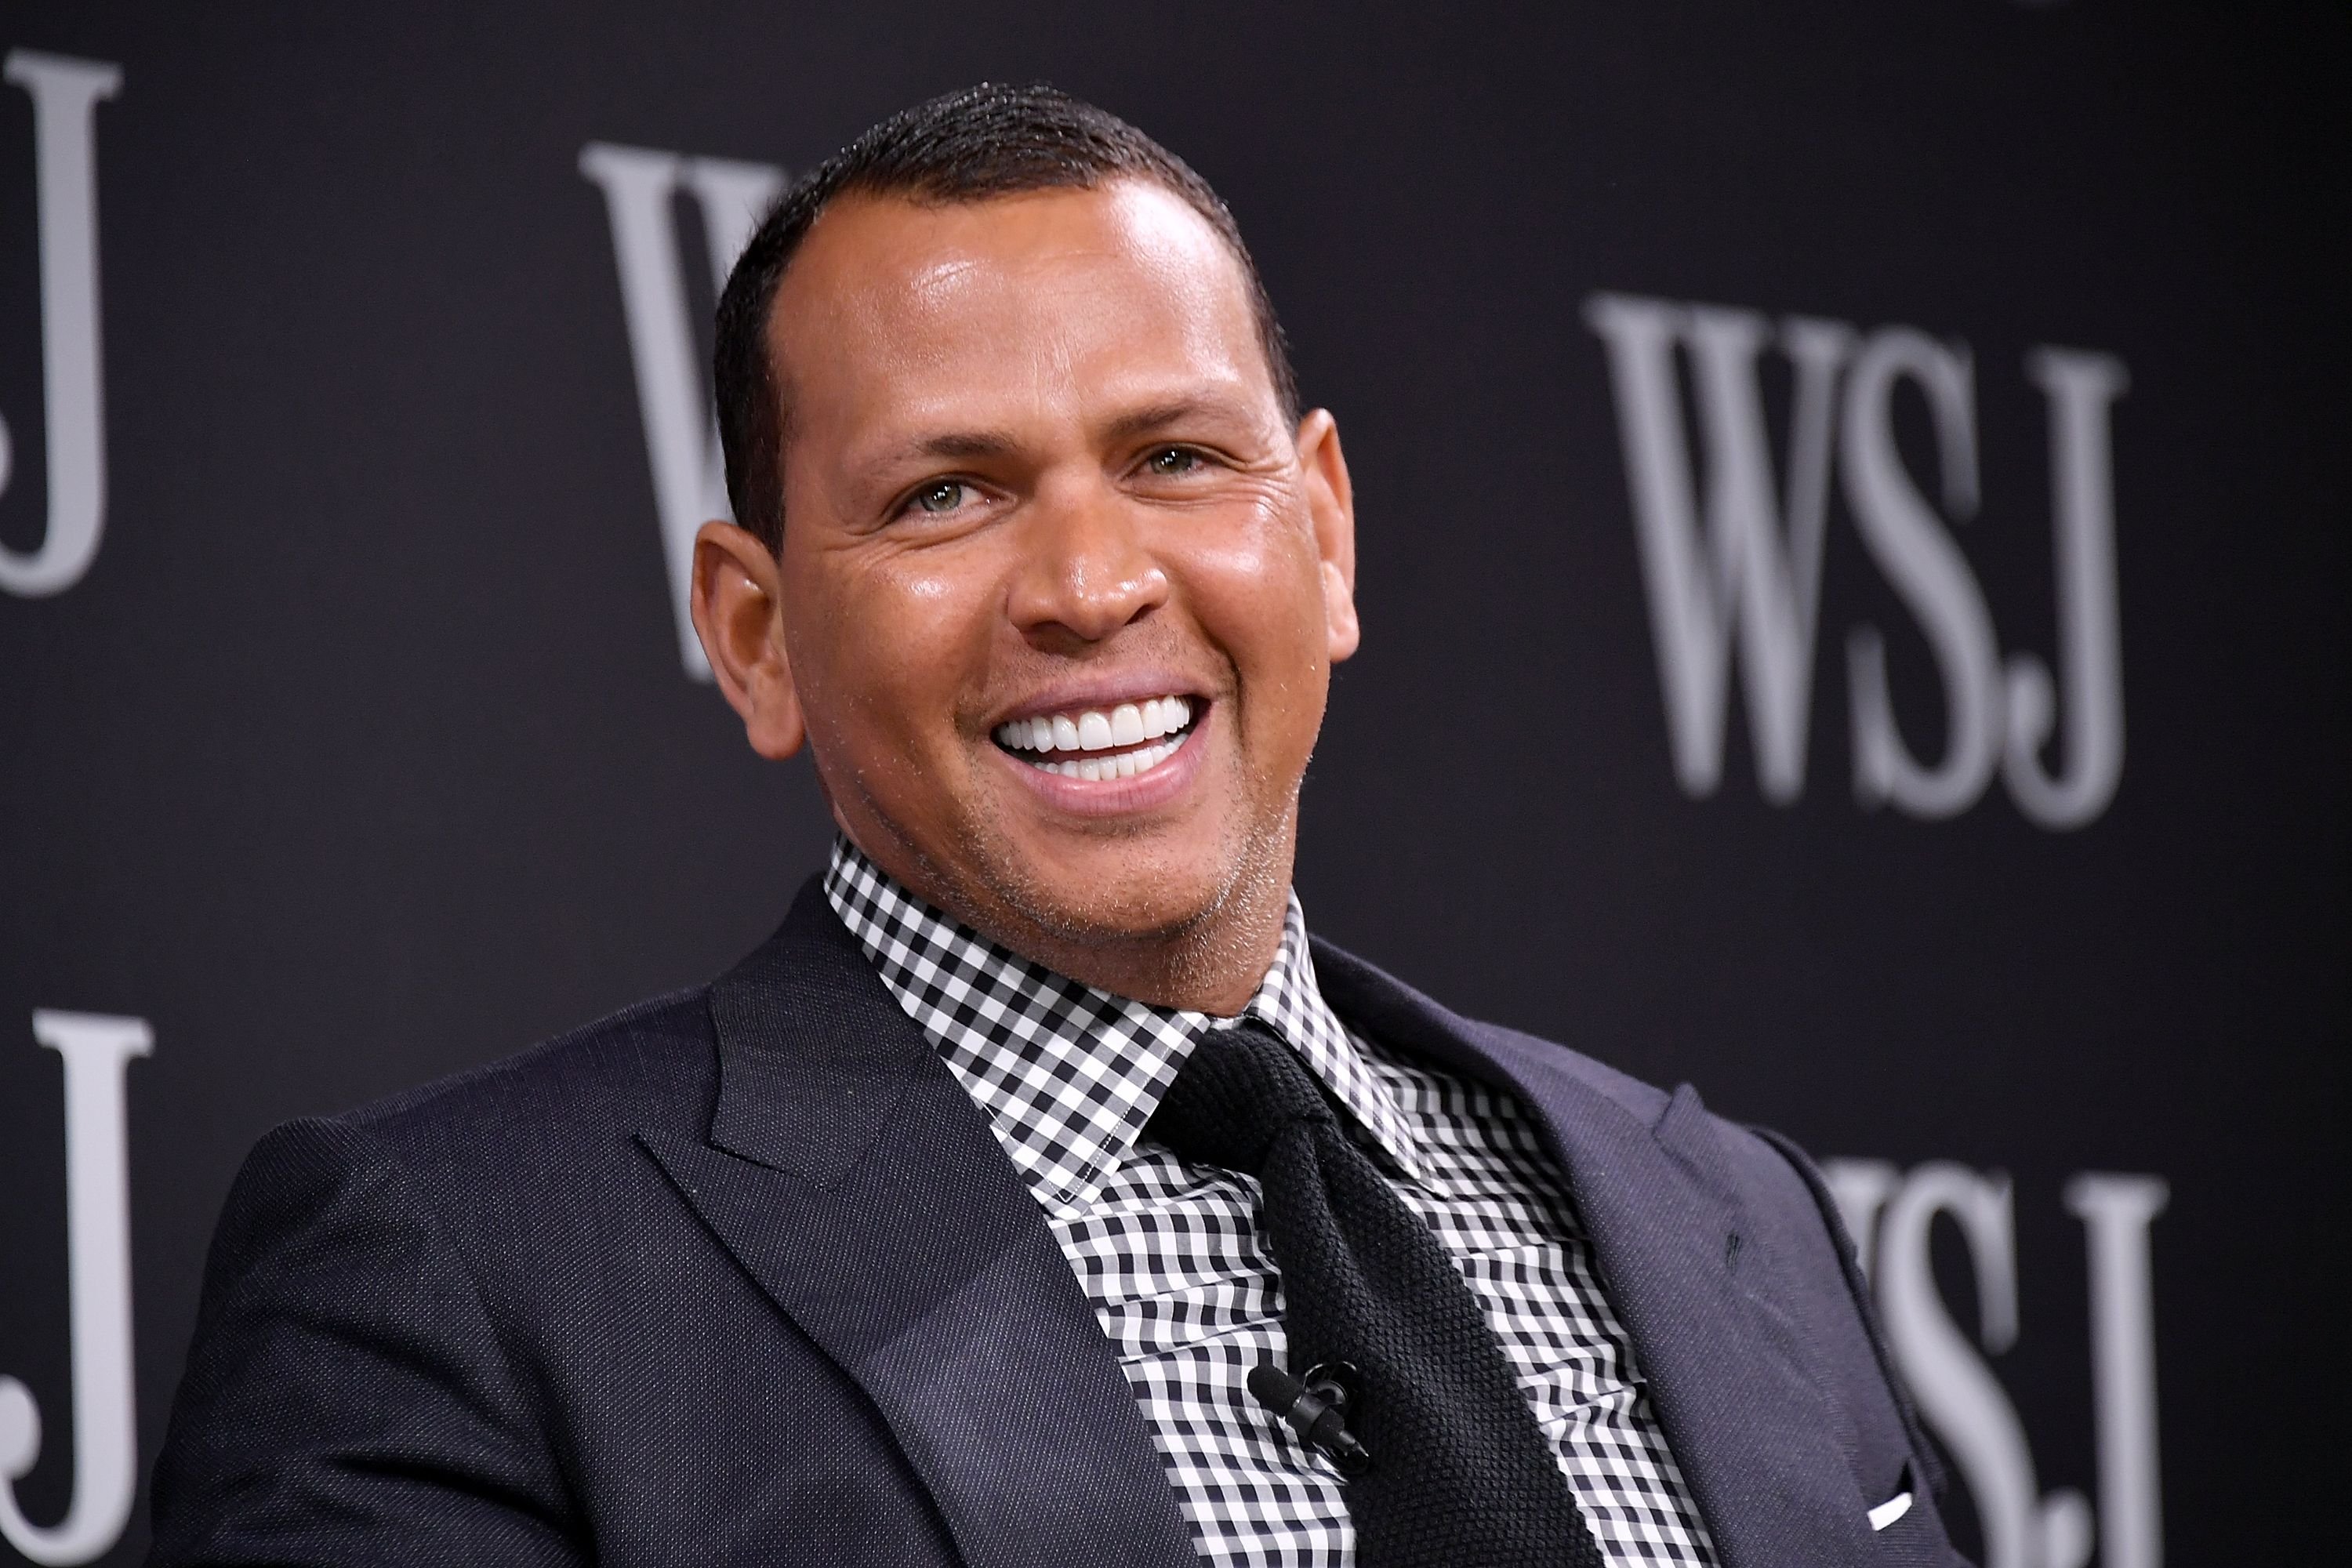 Sports commentator and former professional baseball player Alex Rodriguez takes part in a panel at WSJ's The Future of Everything Festival at Spring Studios on May 8, 2018 | Photo: Getty Images